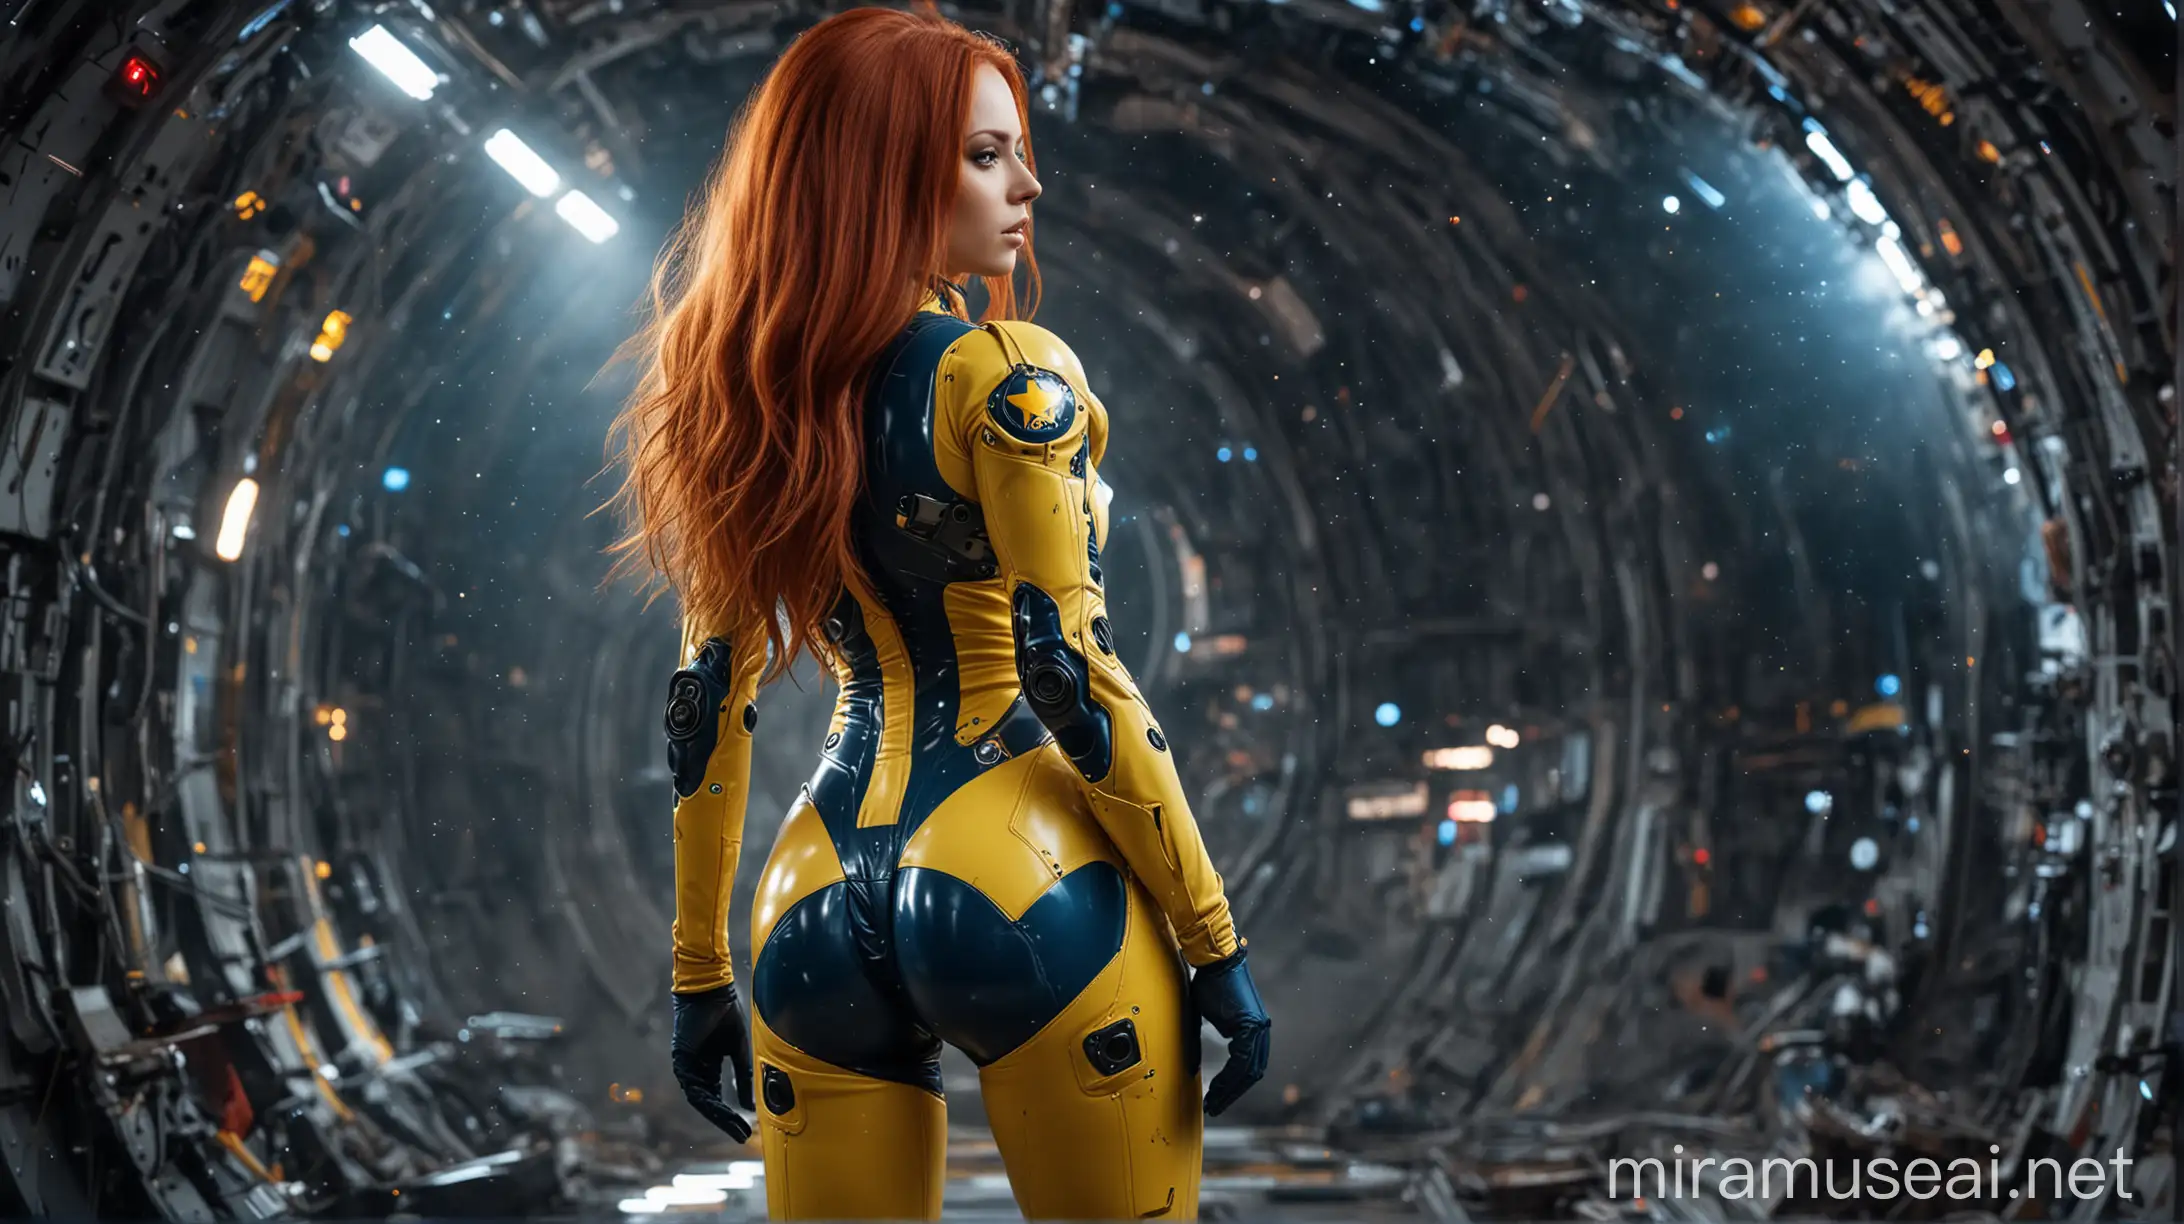 russian girl, slim, long hair, wild hair, red hair, full body, fitness model, from behind, round butt, wide hips, huge boobs, tight spacesuit, tough armored spacesuit, yellow and blue spacesuit, glowing spacesuit parts, futuristic planet, stars, galaxies